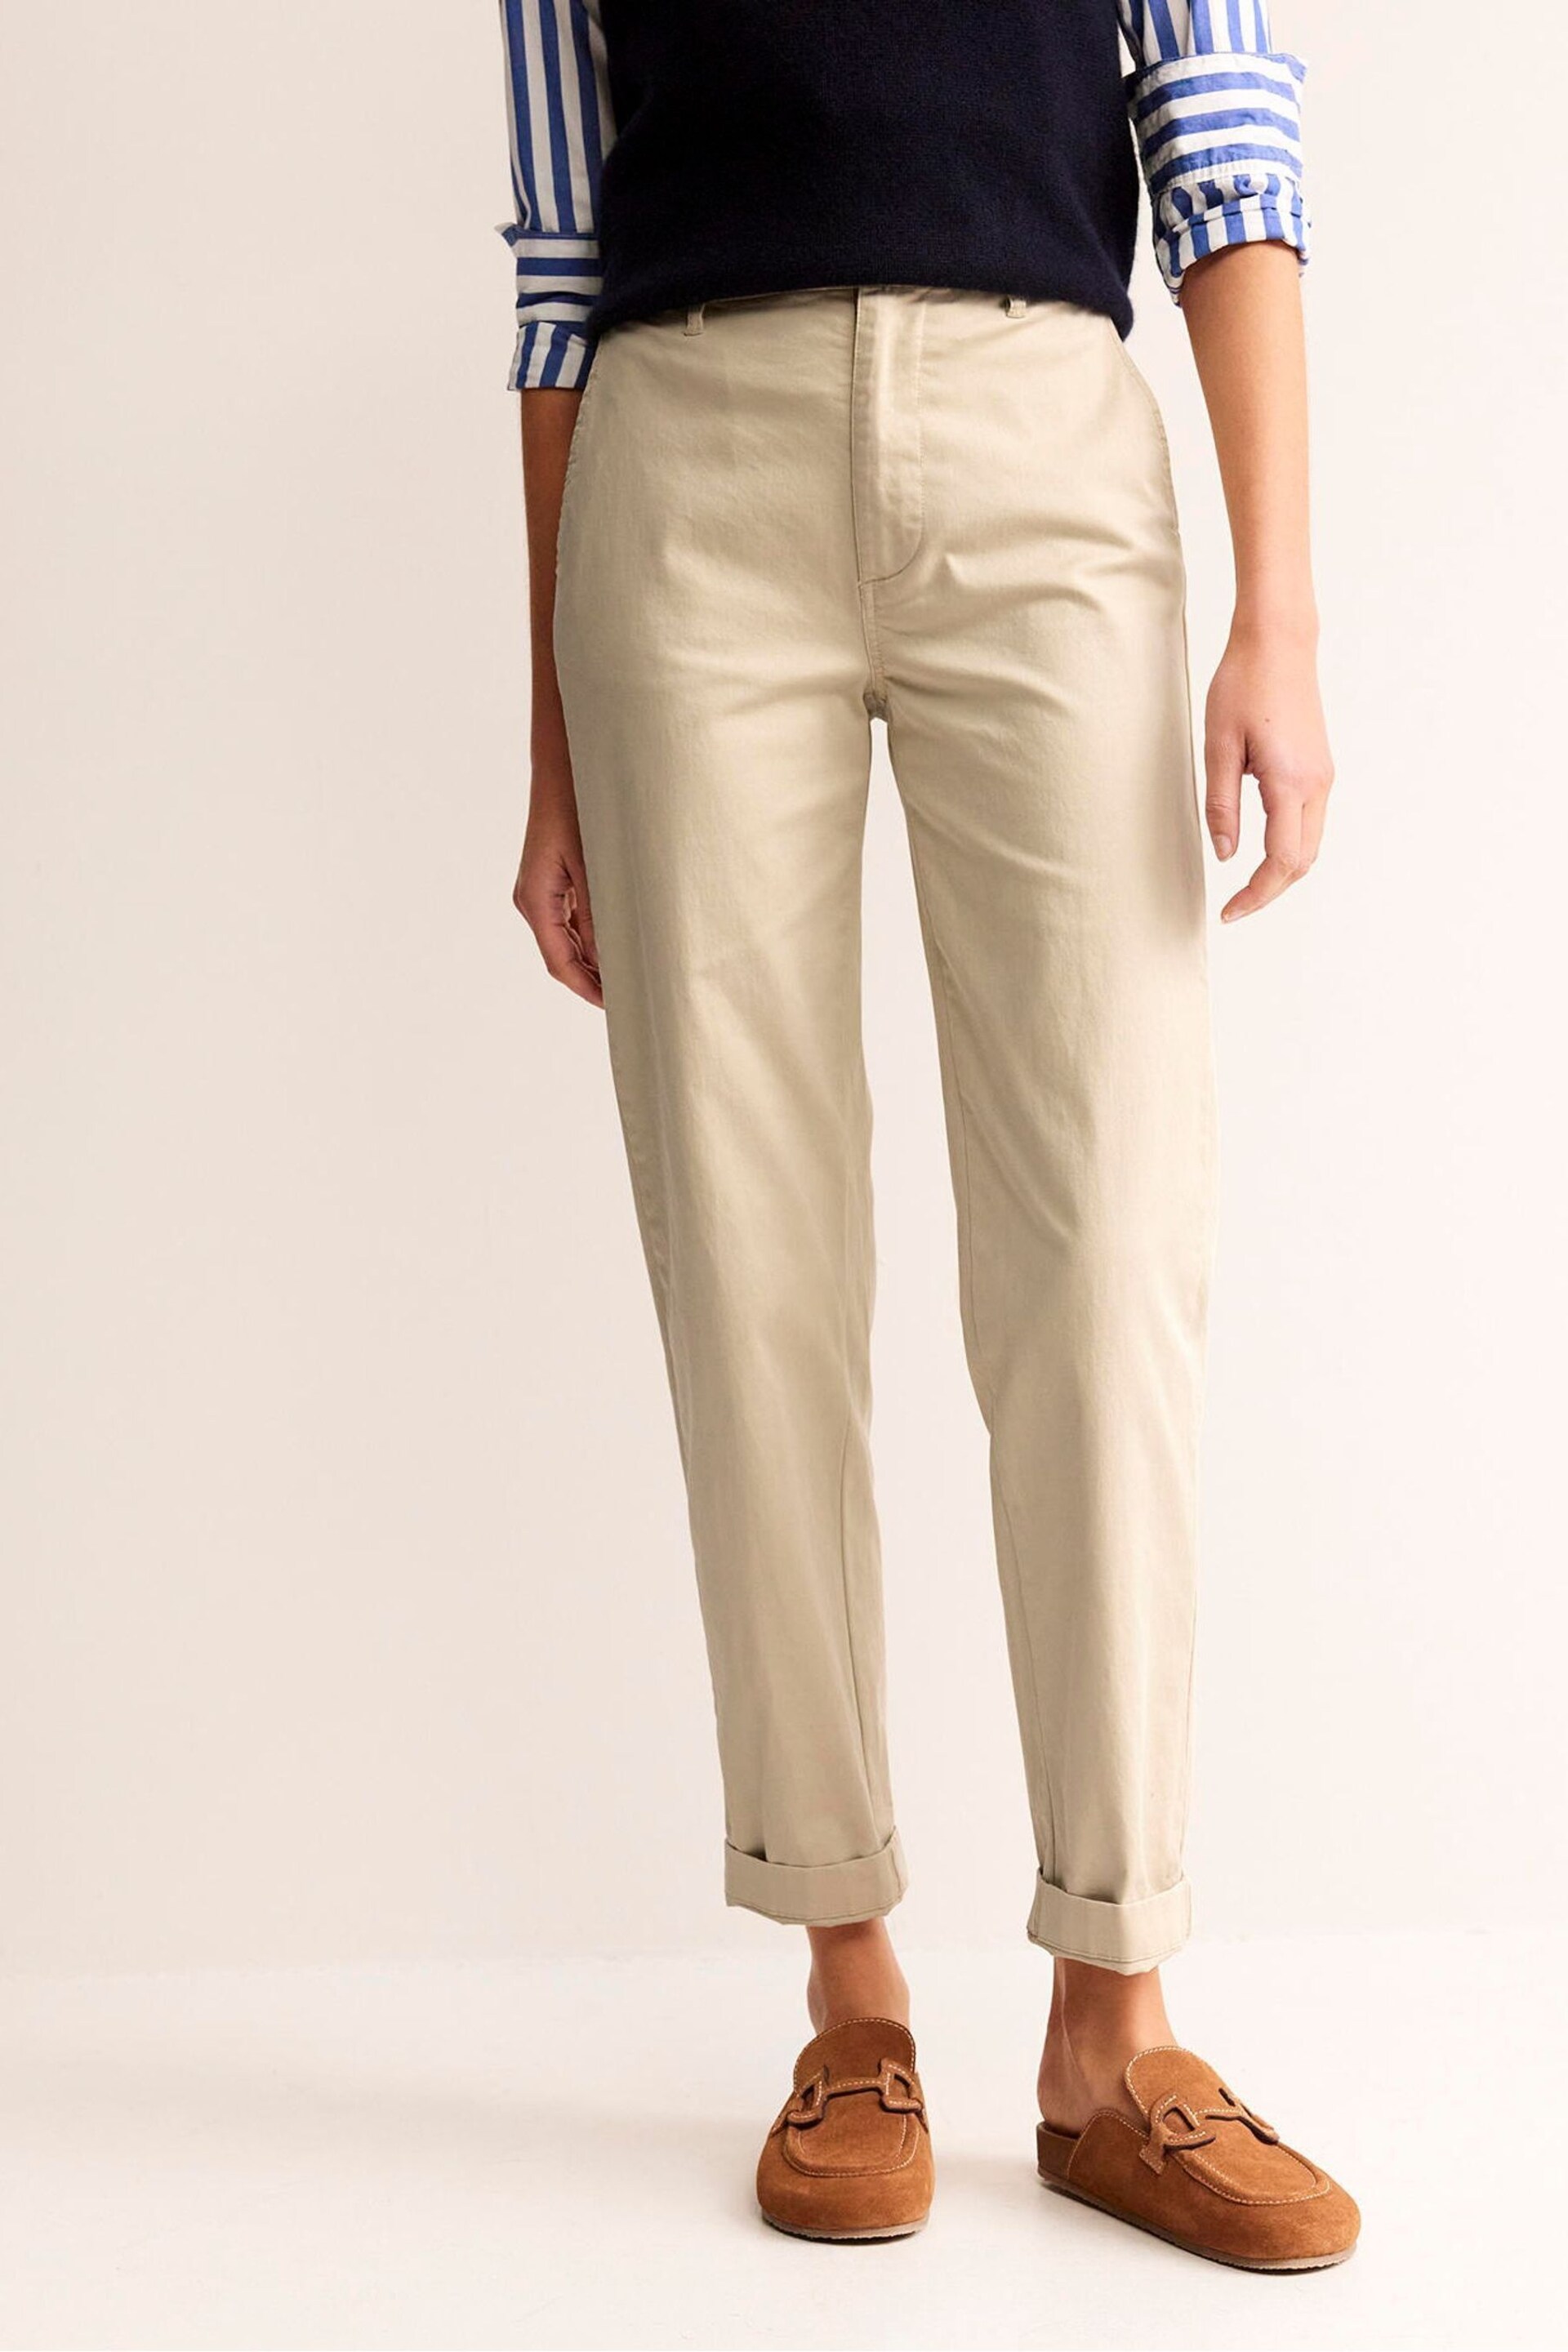 Boden Natural Barnsbury Chino Trousers - Image 1 of 5